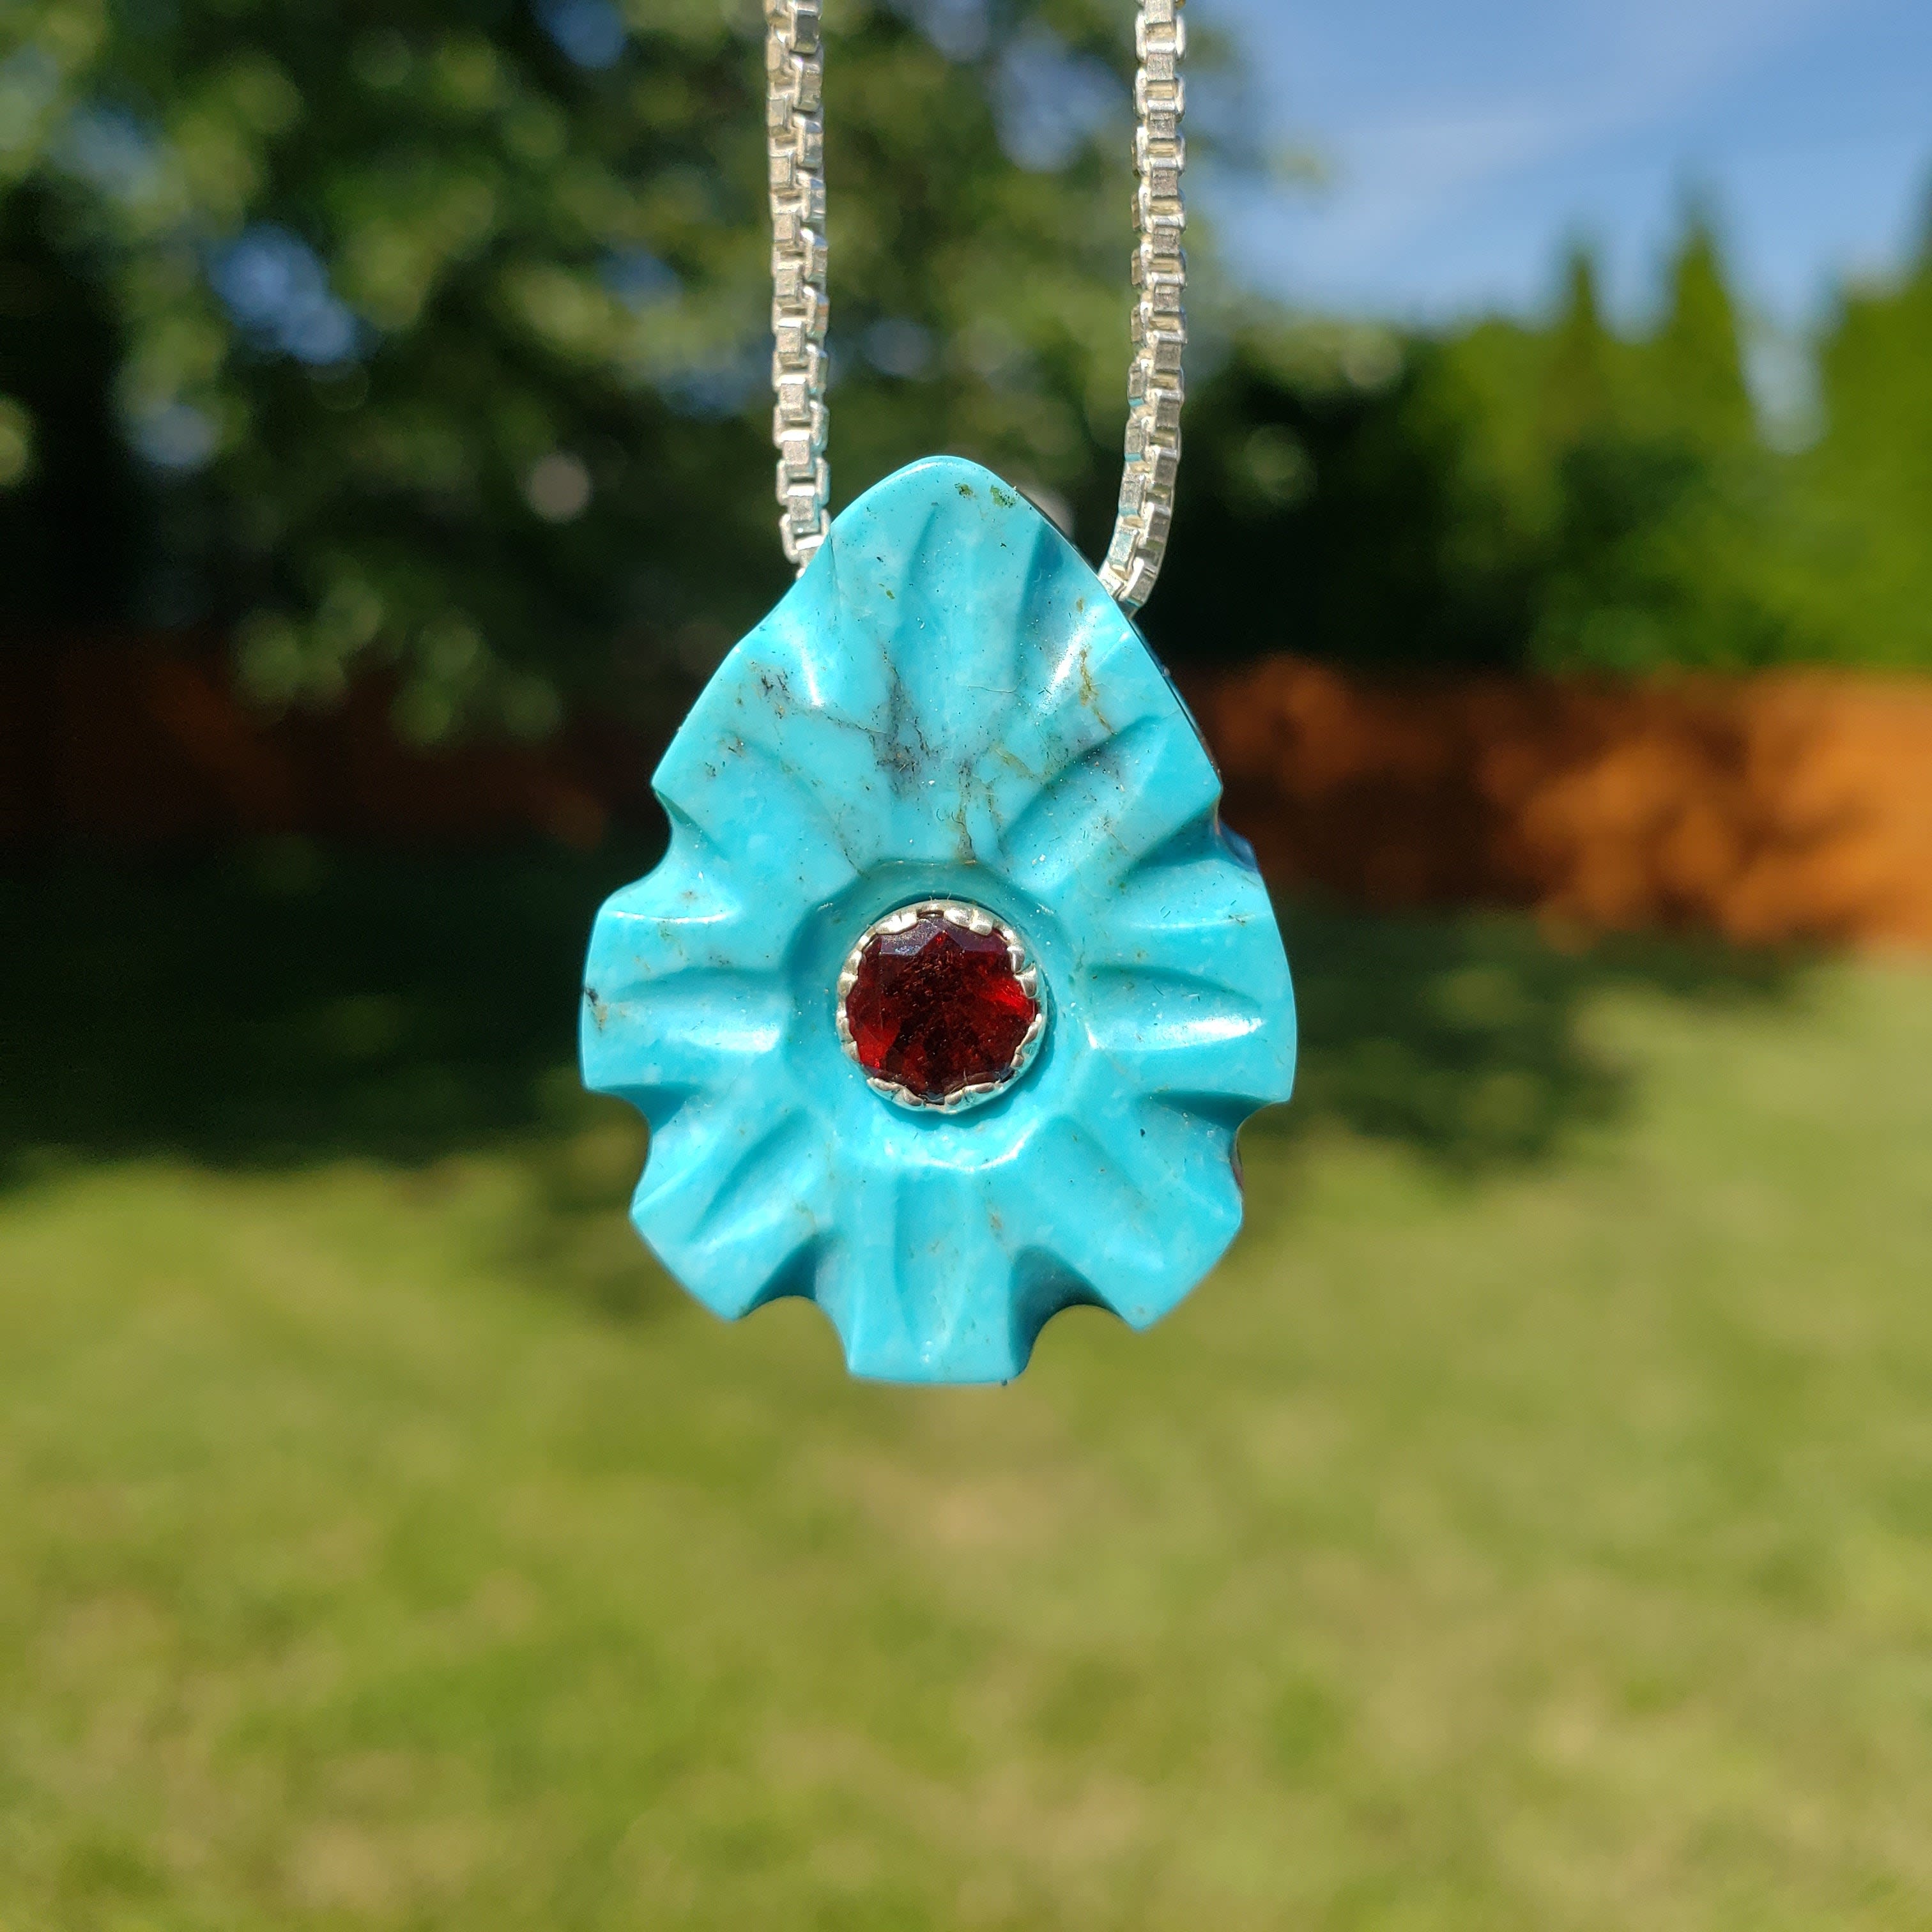 Kingman Spaceship! Carved turquoise pendant with garnet - Handmade Jewelry  - Heart on Sleeve Jewelry | Handmade Jewelry and Gemstones in Rochester